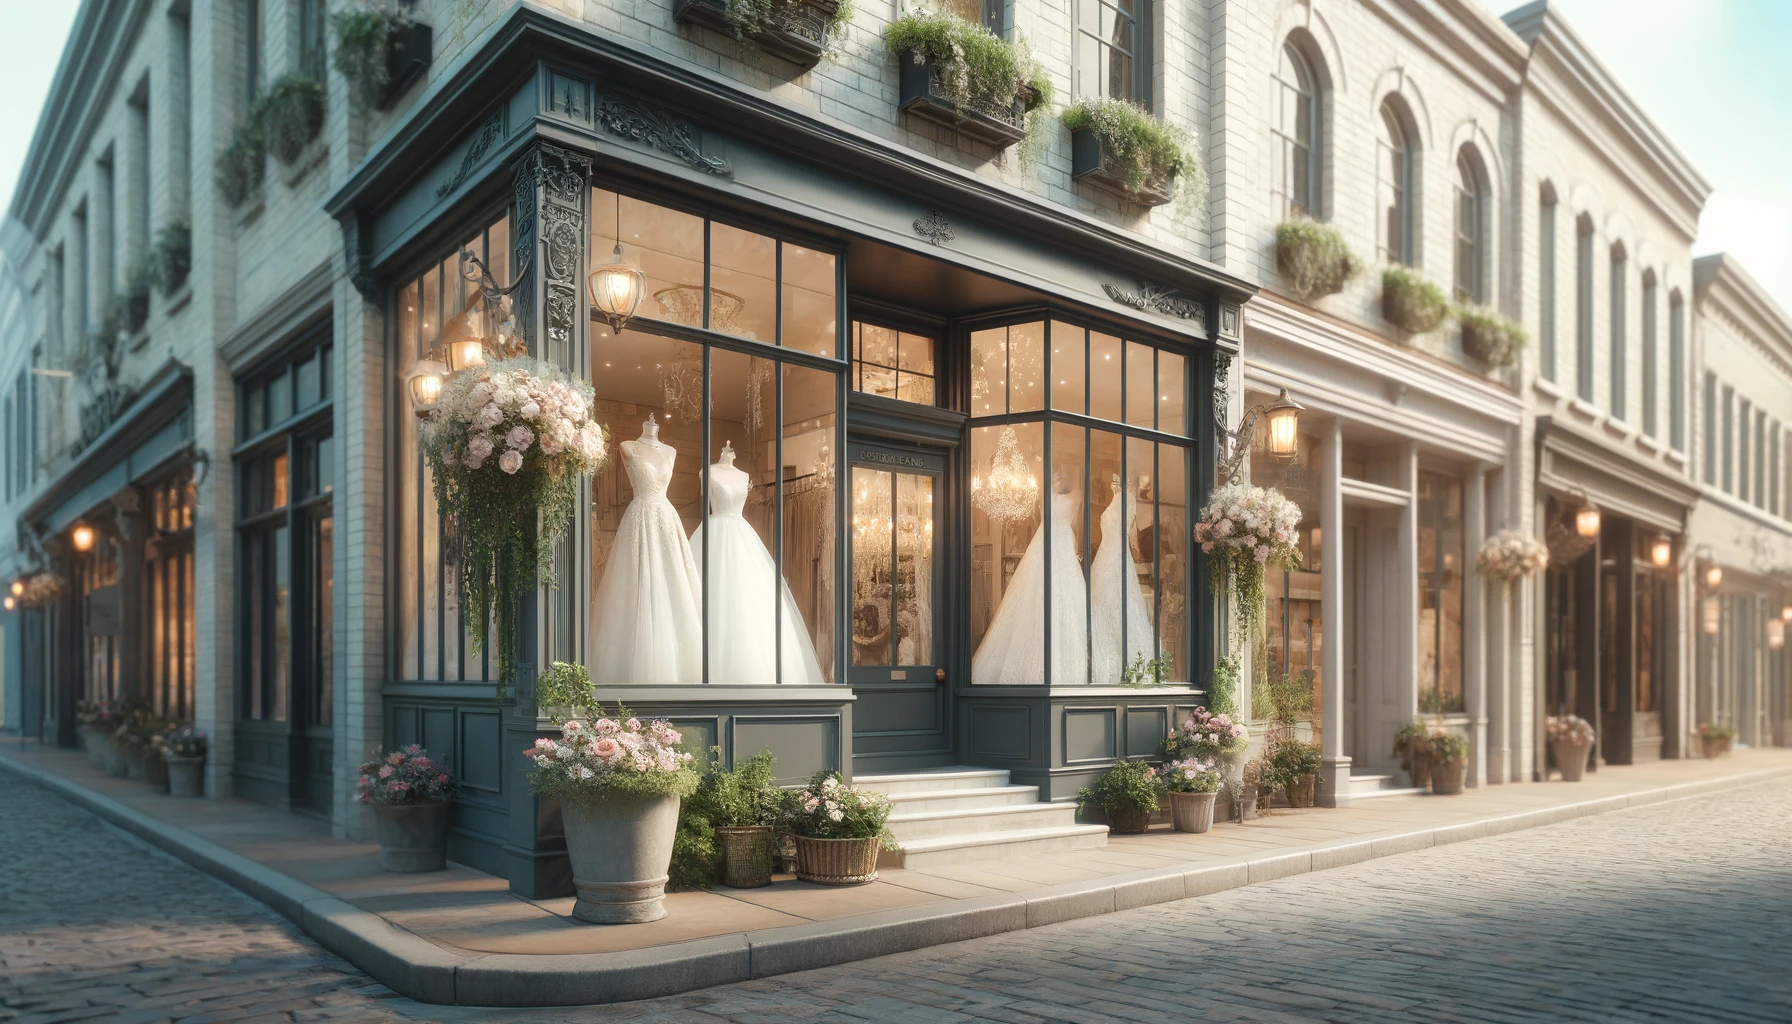 How To Find The Right Bridal Boutique For You A Comprehensive Guide